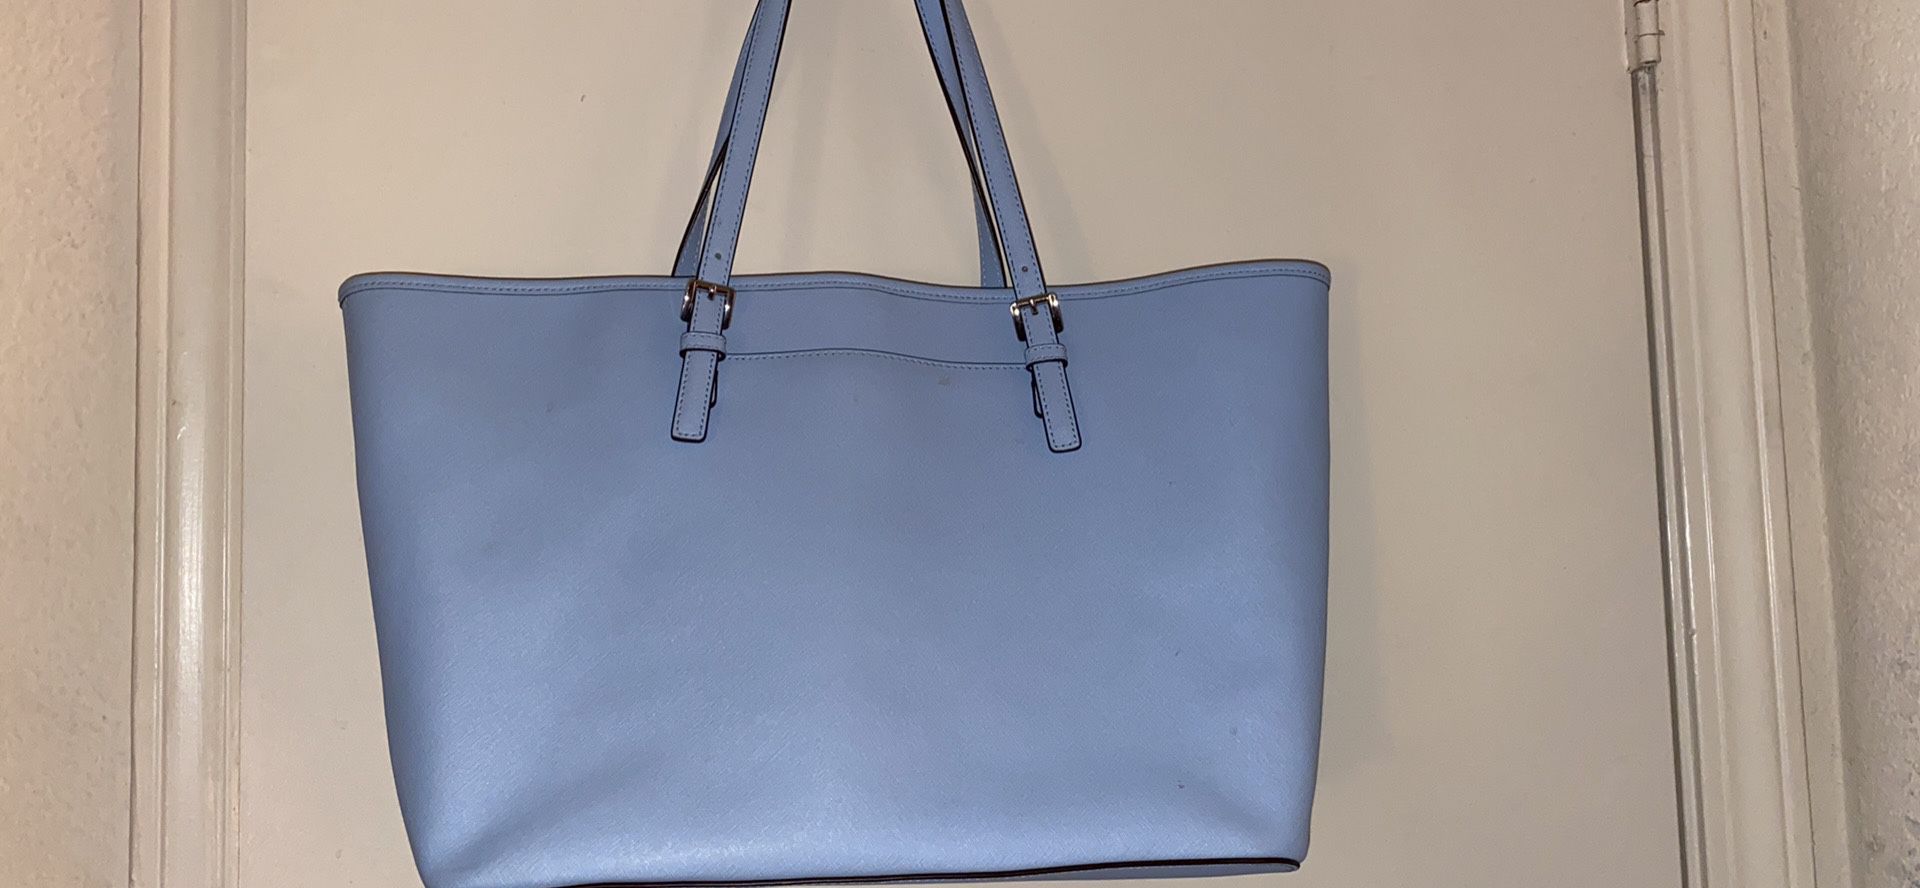 Michael Kors Traditional Tote with a matching wallet. Small stain left bottomed of tote.